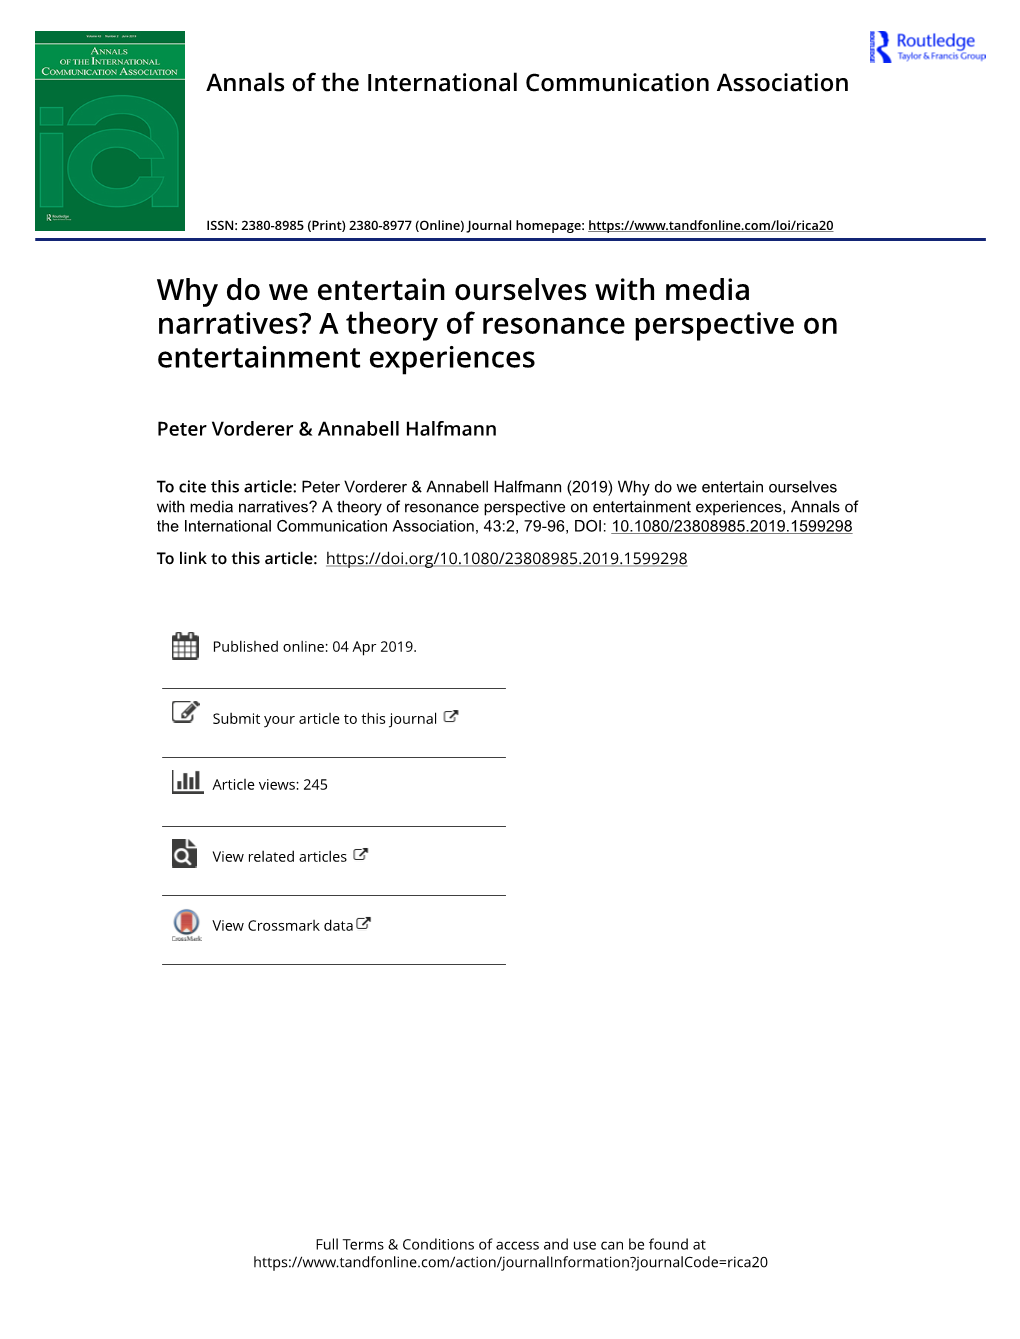 Why Do We Entertain Ourselves with Media Narratives? a Theory of Resonance Perspective on Entertainment Experiences